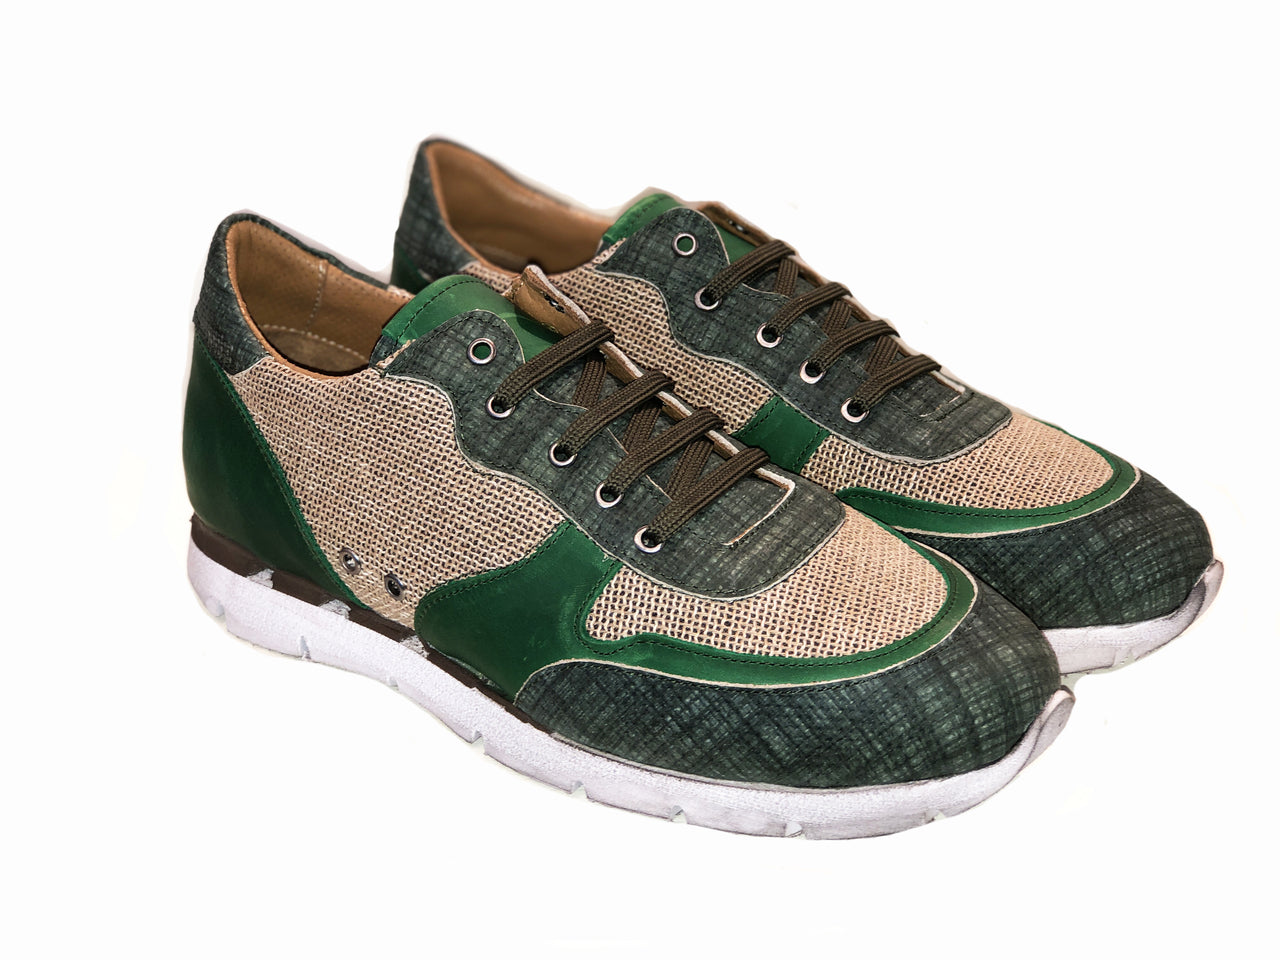 Pelle Line Exclusive 8119 Casual Lace Up Sneaker - Green Multi